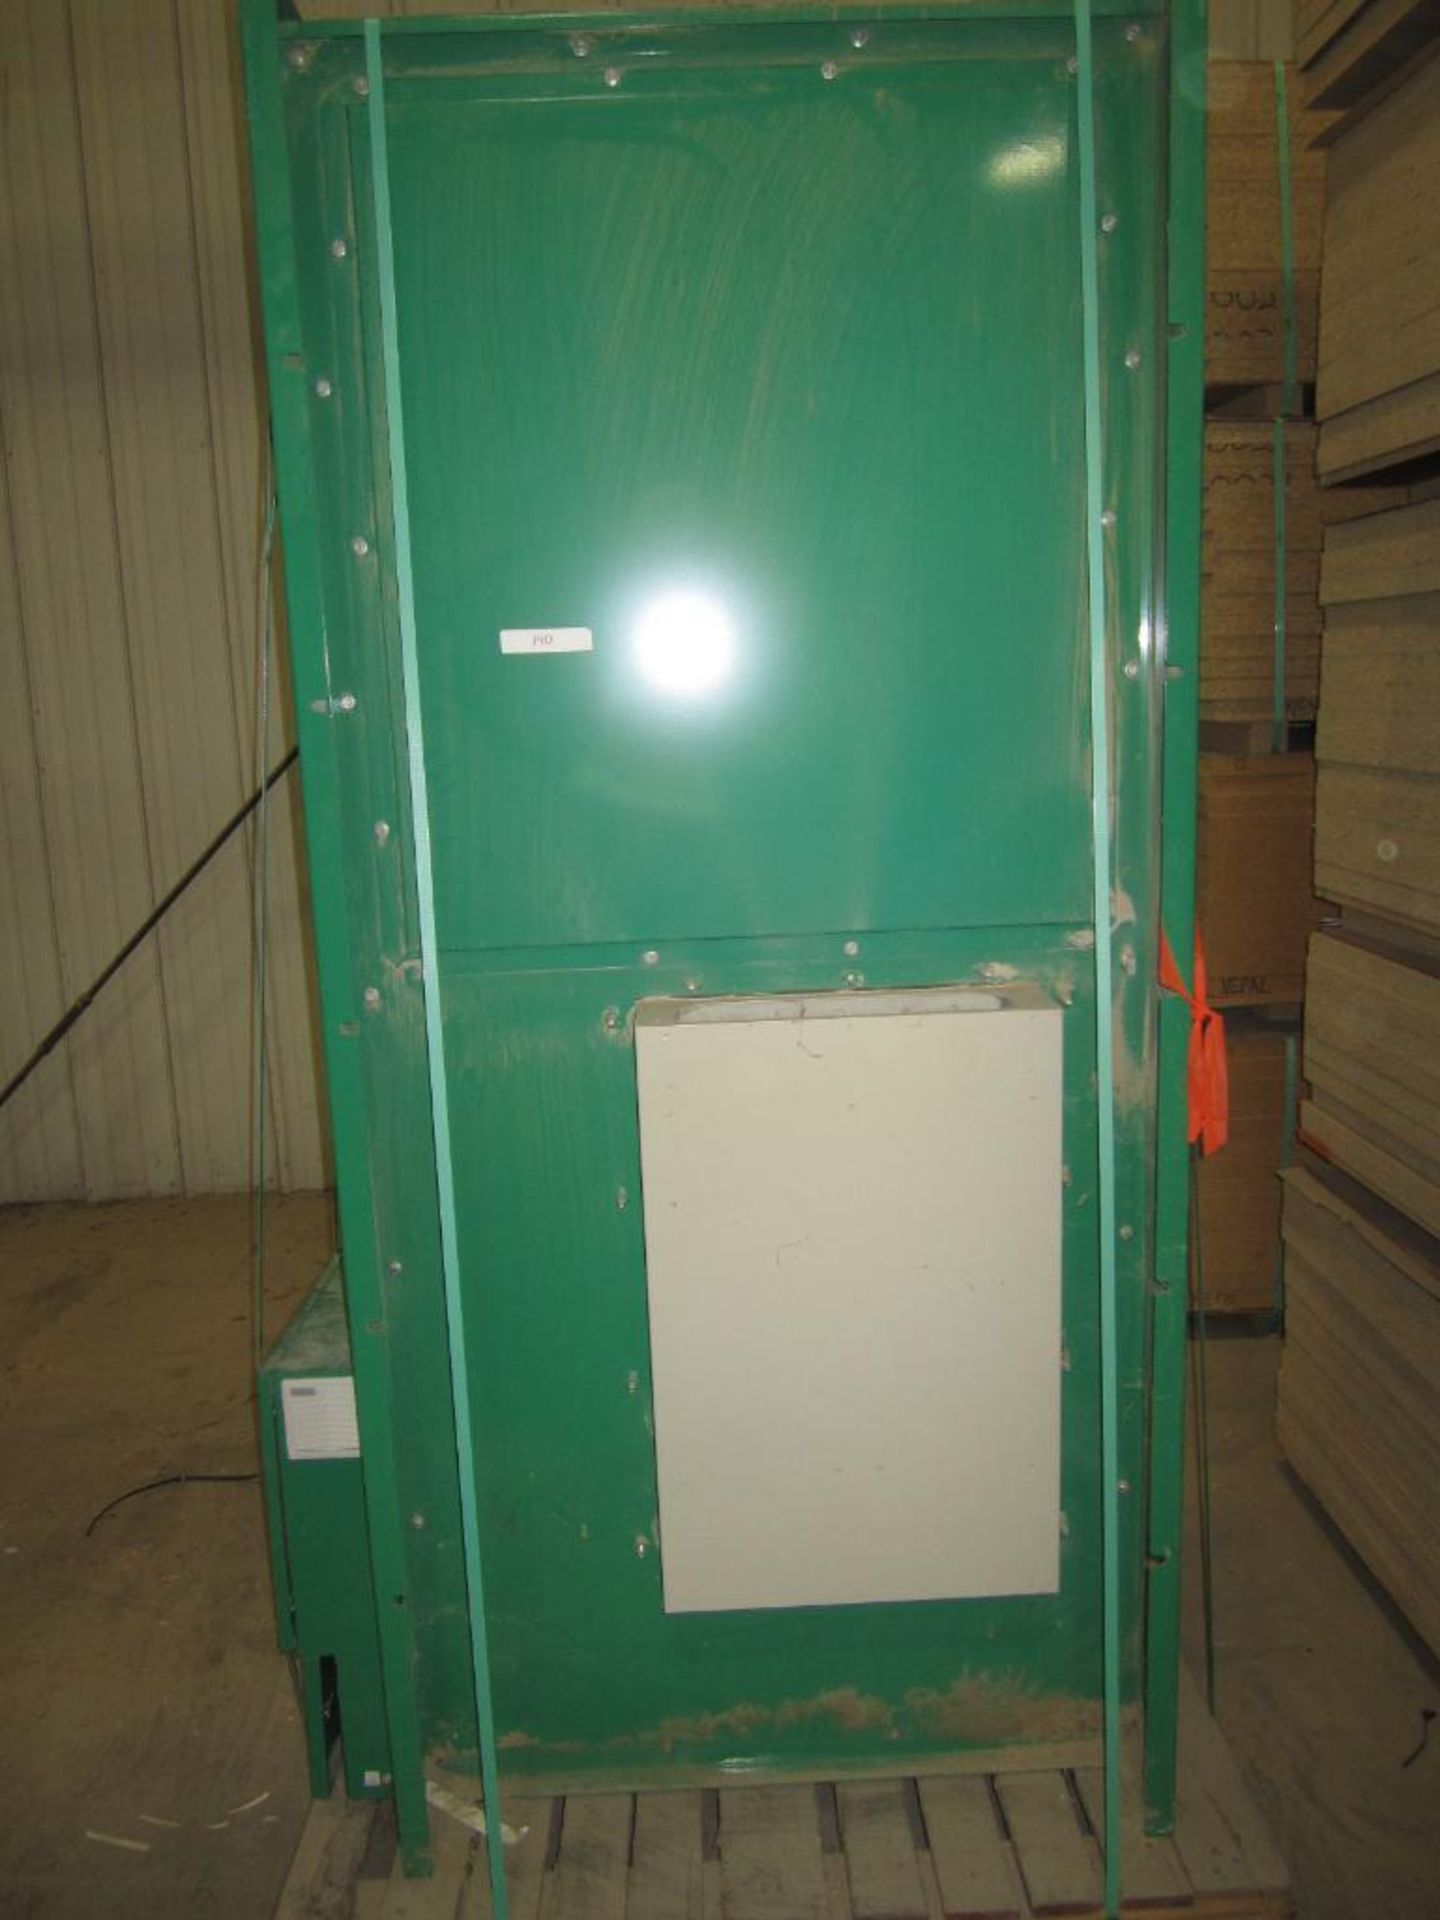 Ecogate dust collector - Image 5 of 5